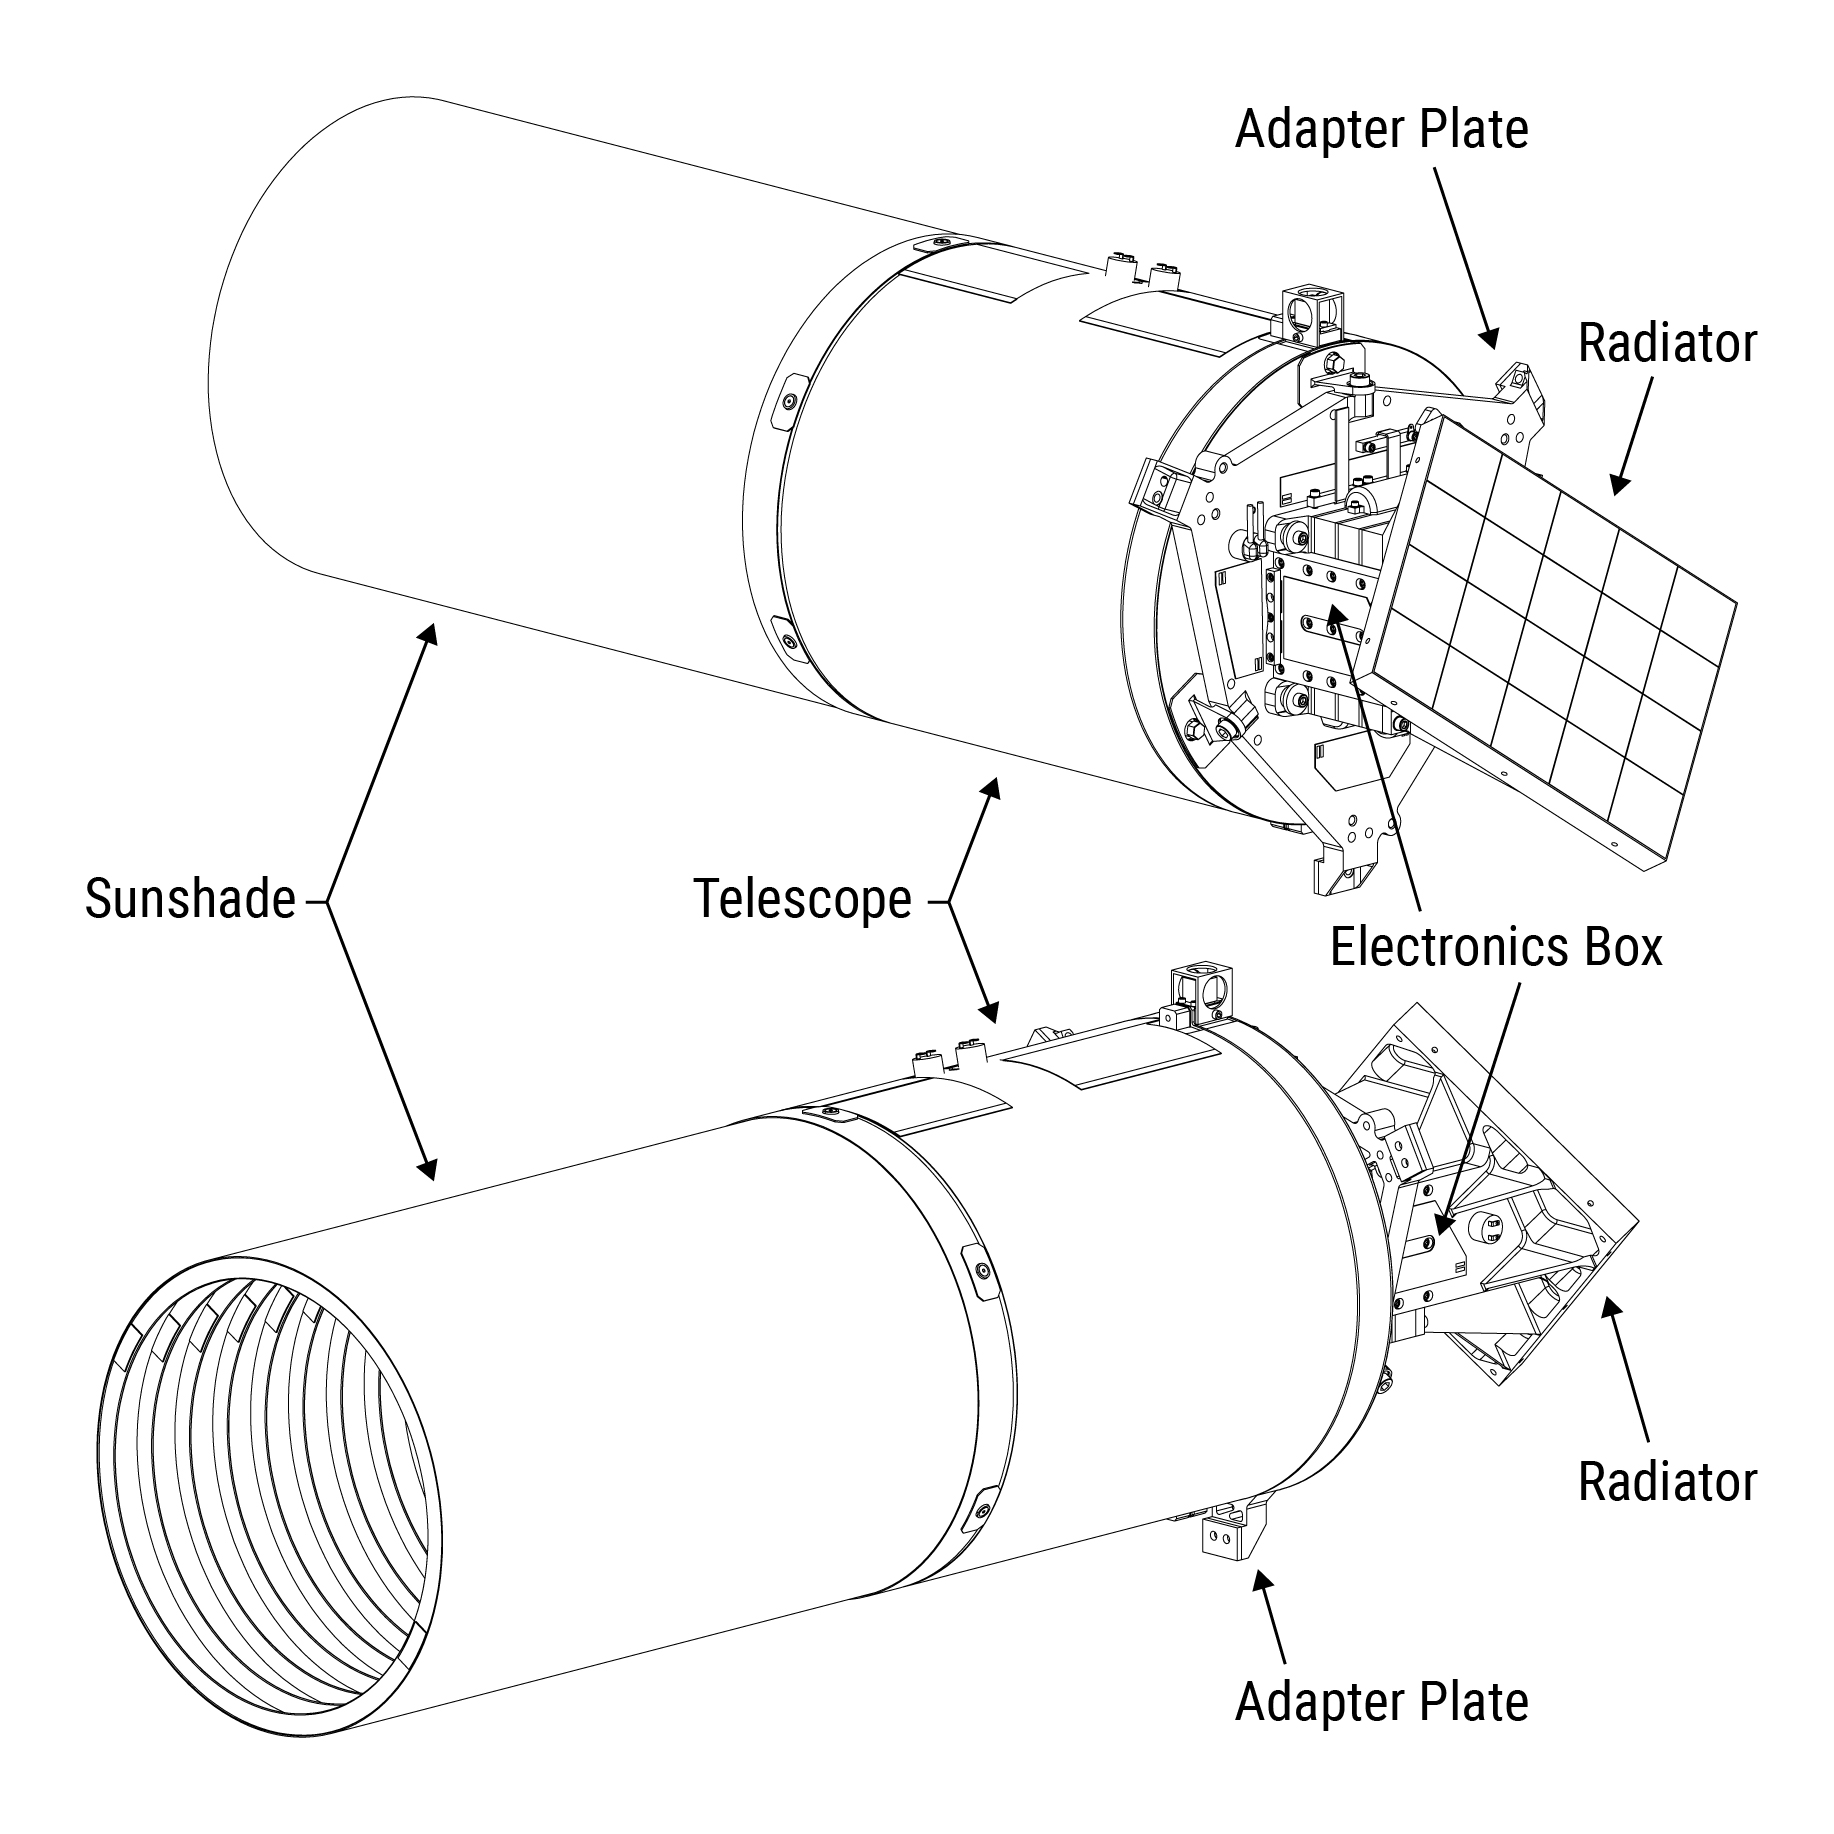 Technical drawing of the ShadowCam instrument with the sunshade, telescope, adapter plate, electronics box, and radiator labeled.